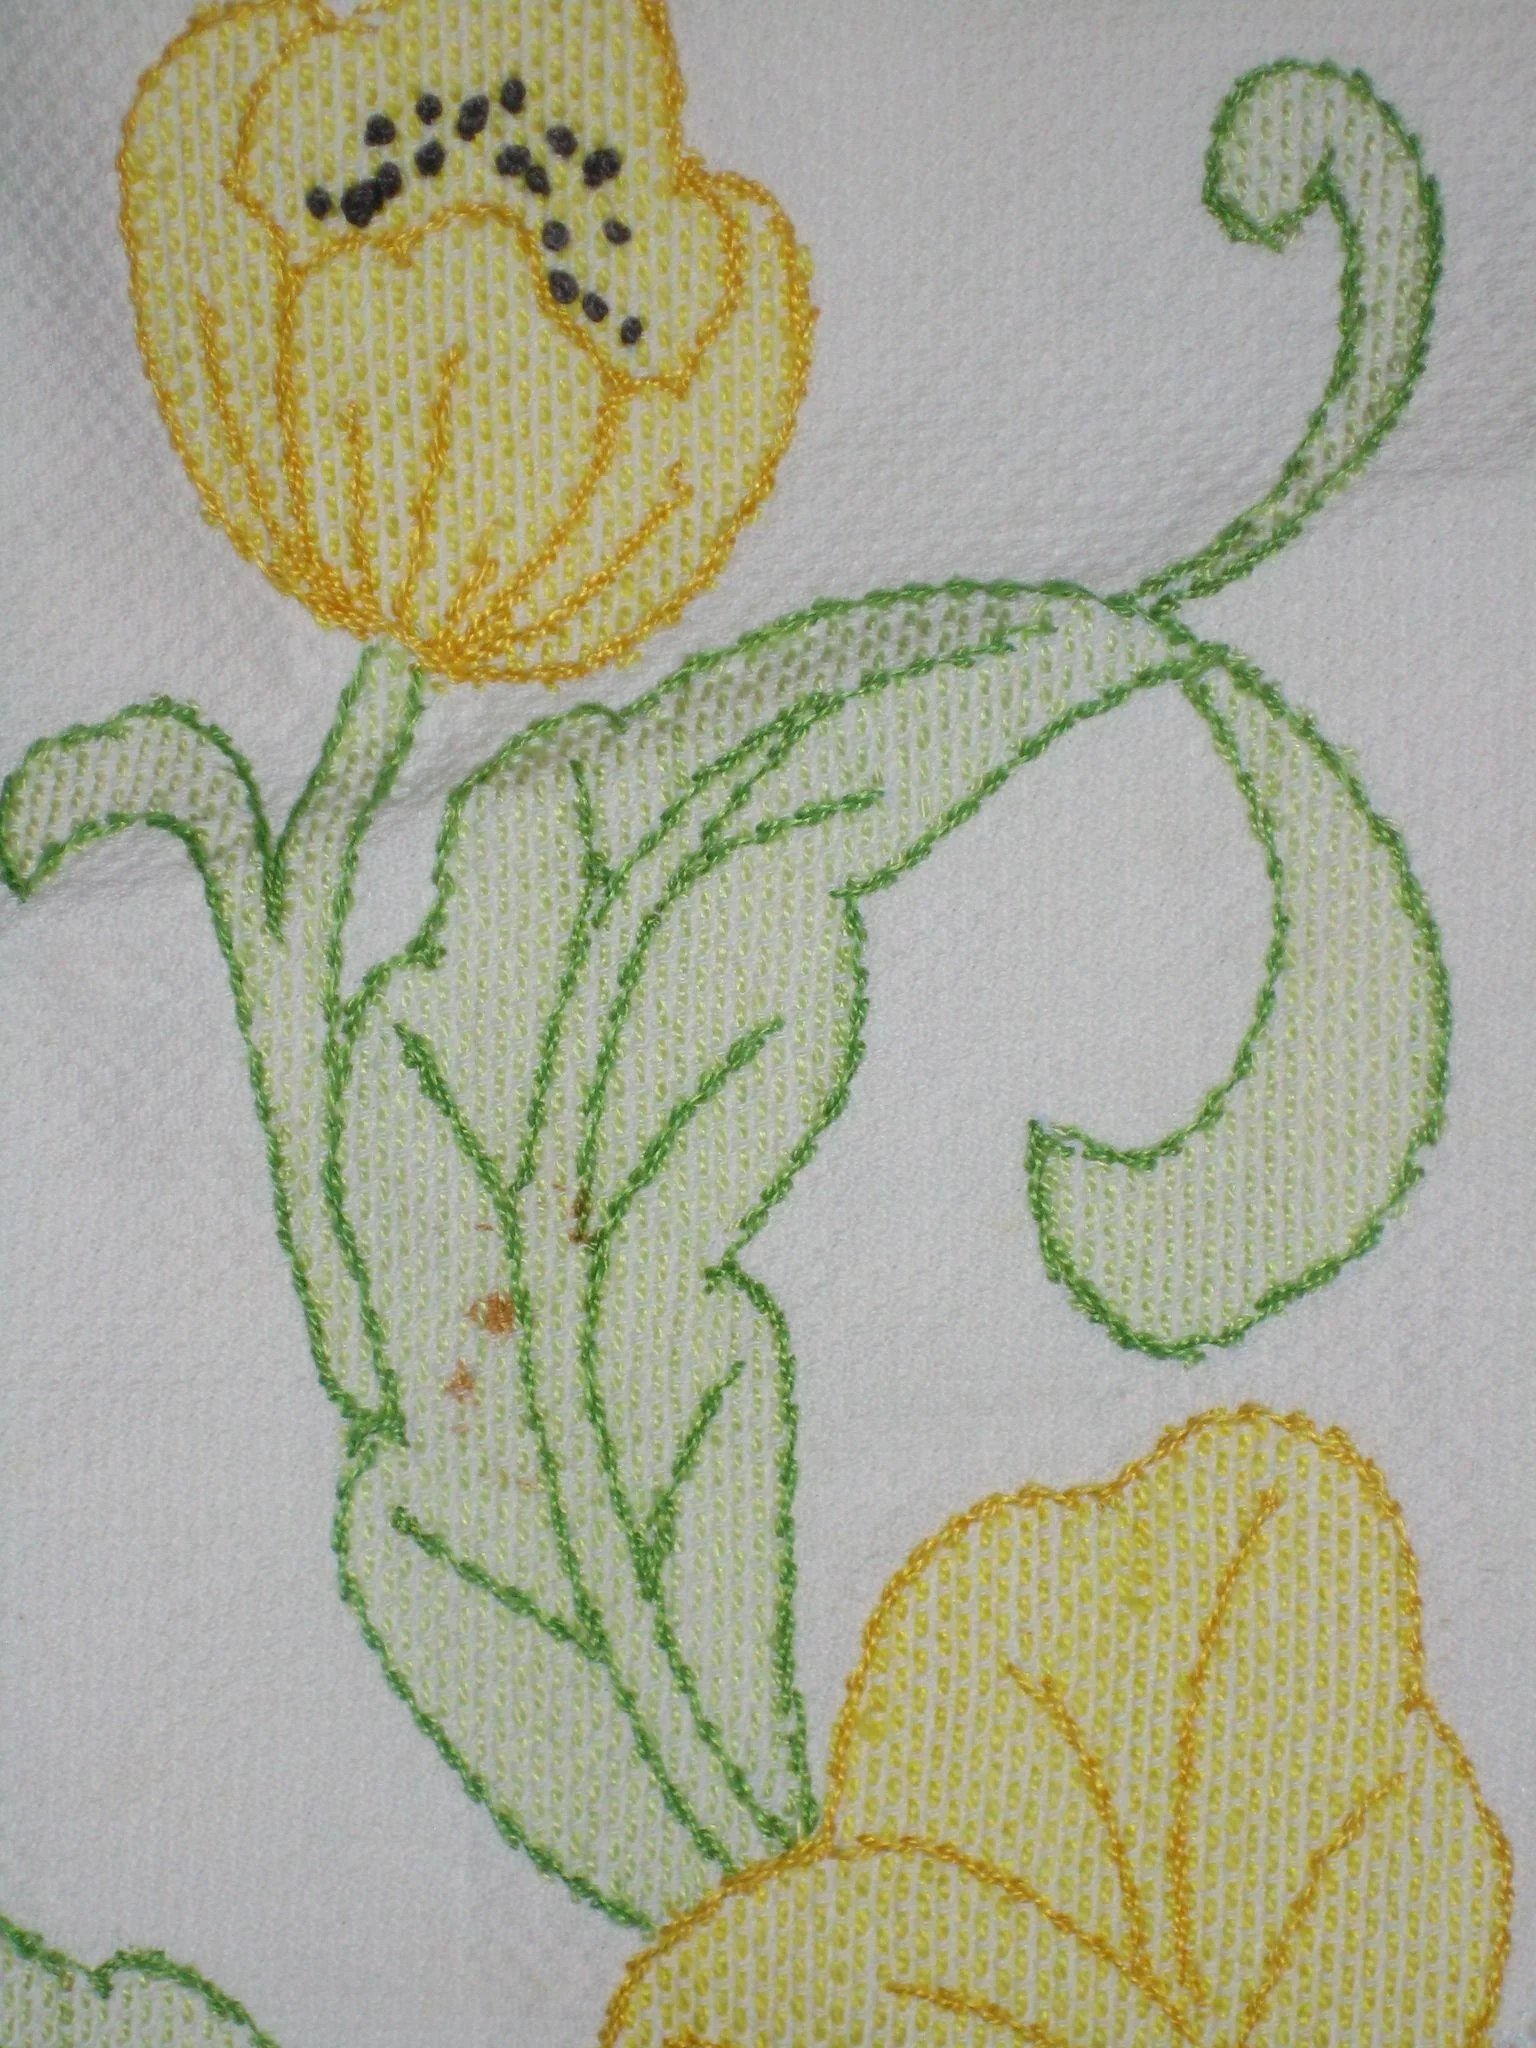 Huck Embroidery Free Patterns Vintage Tea Towel With Swedish Weaving Or Huck Embroidery Yellow Flowers